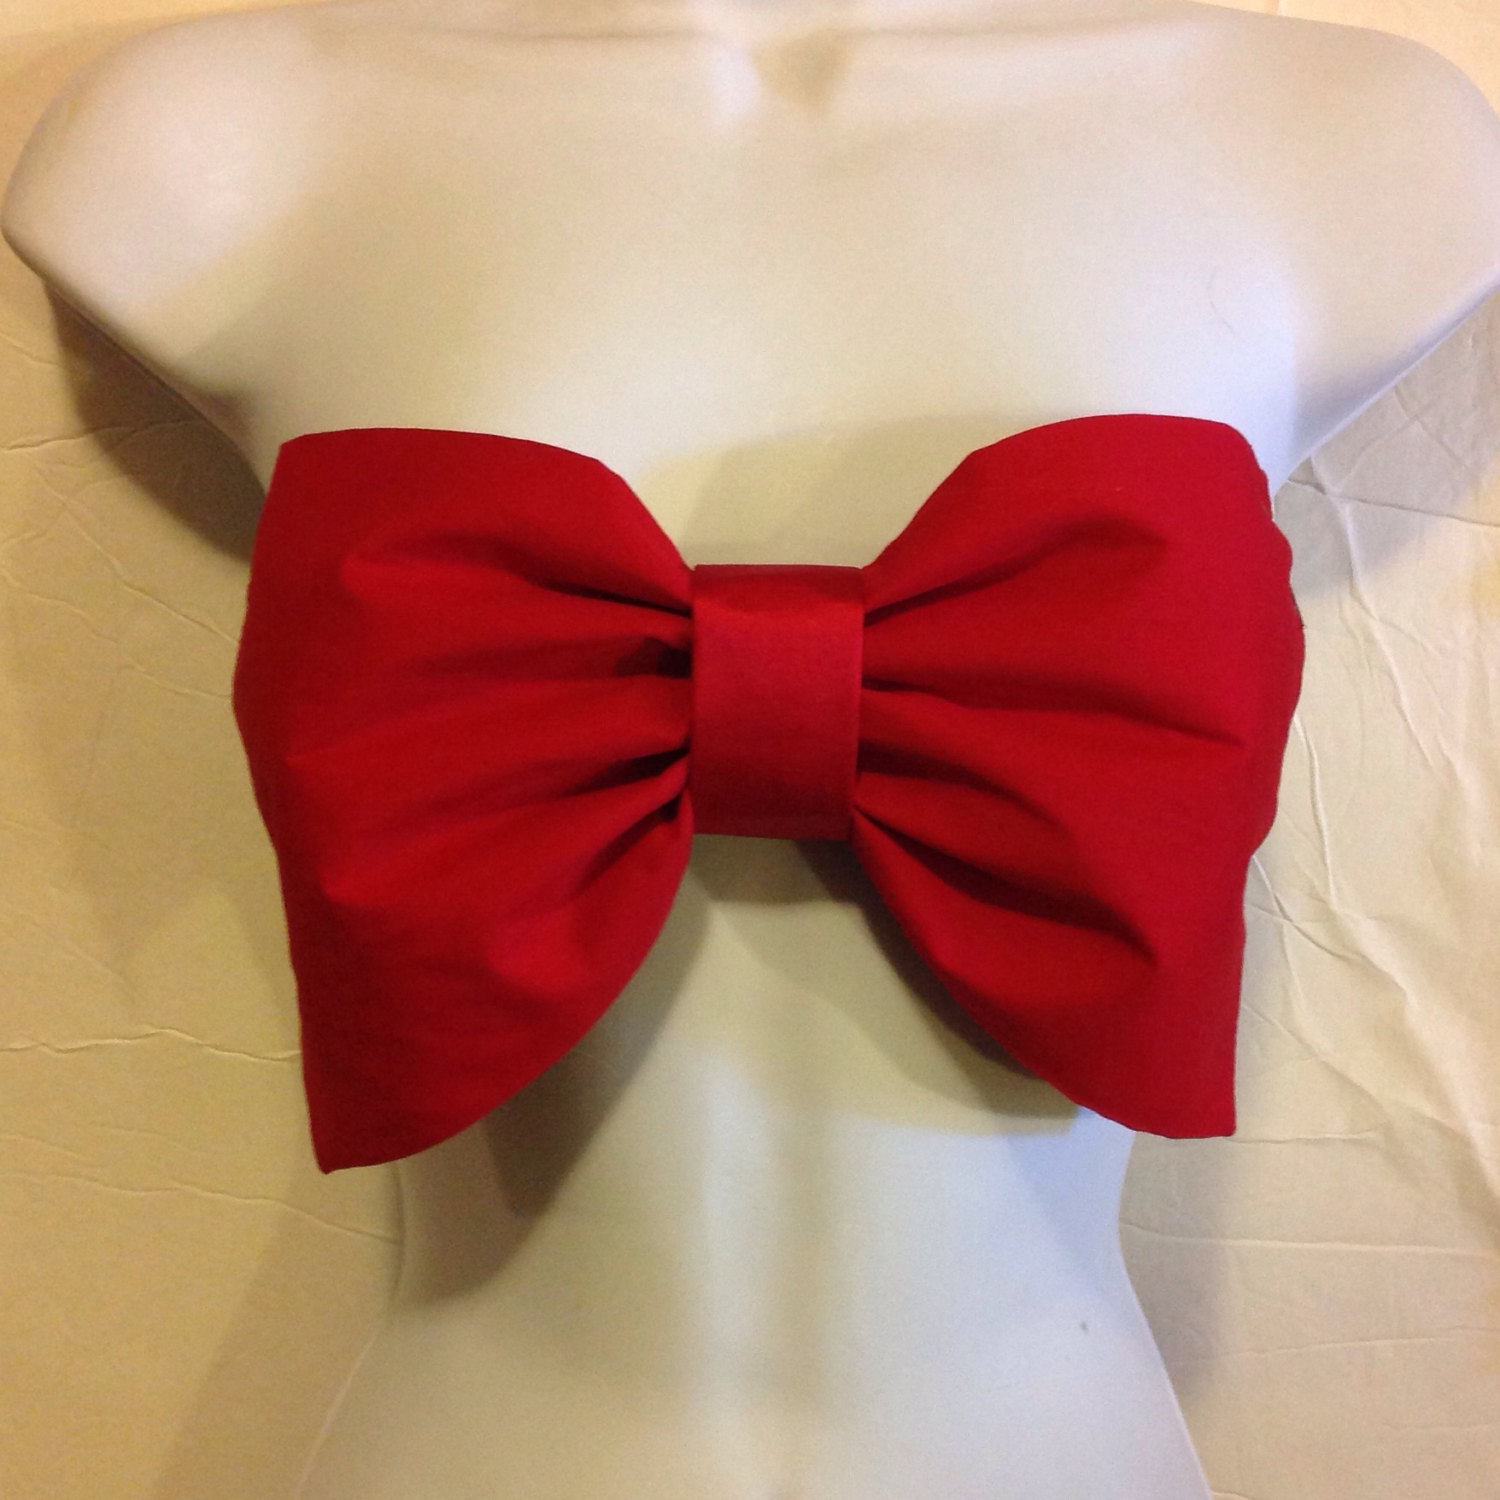 Red Bow-Bow Bandeau-Bow Bra-Bikini Top-Swimsuit Top-Big Bow-Large ...